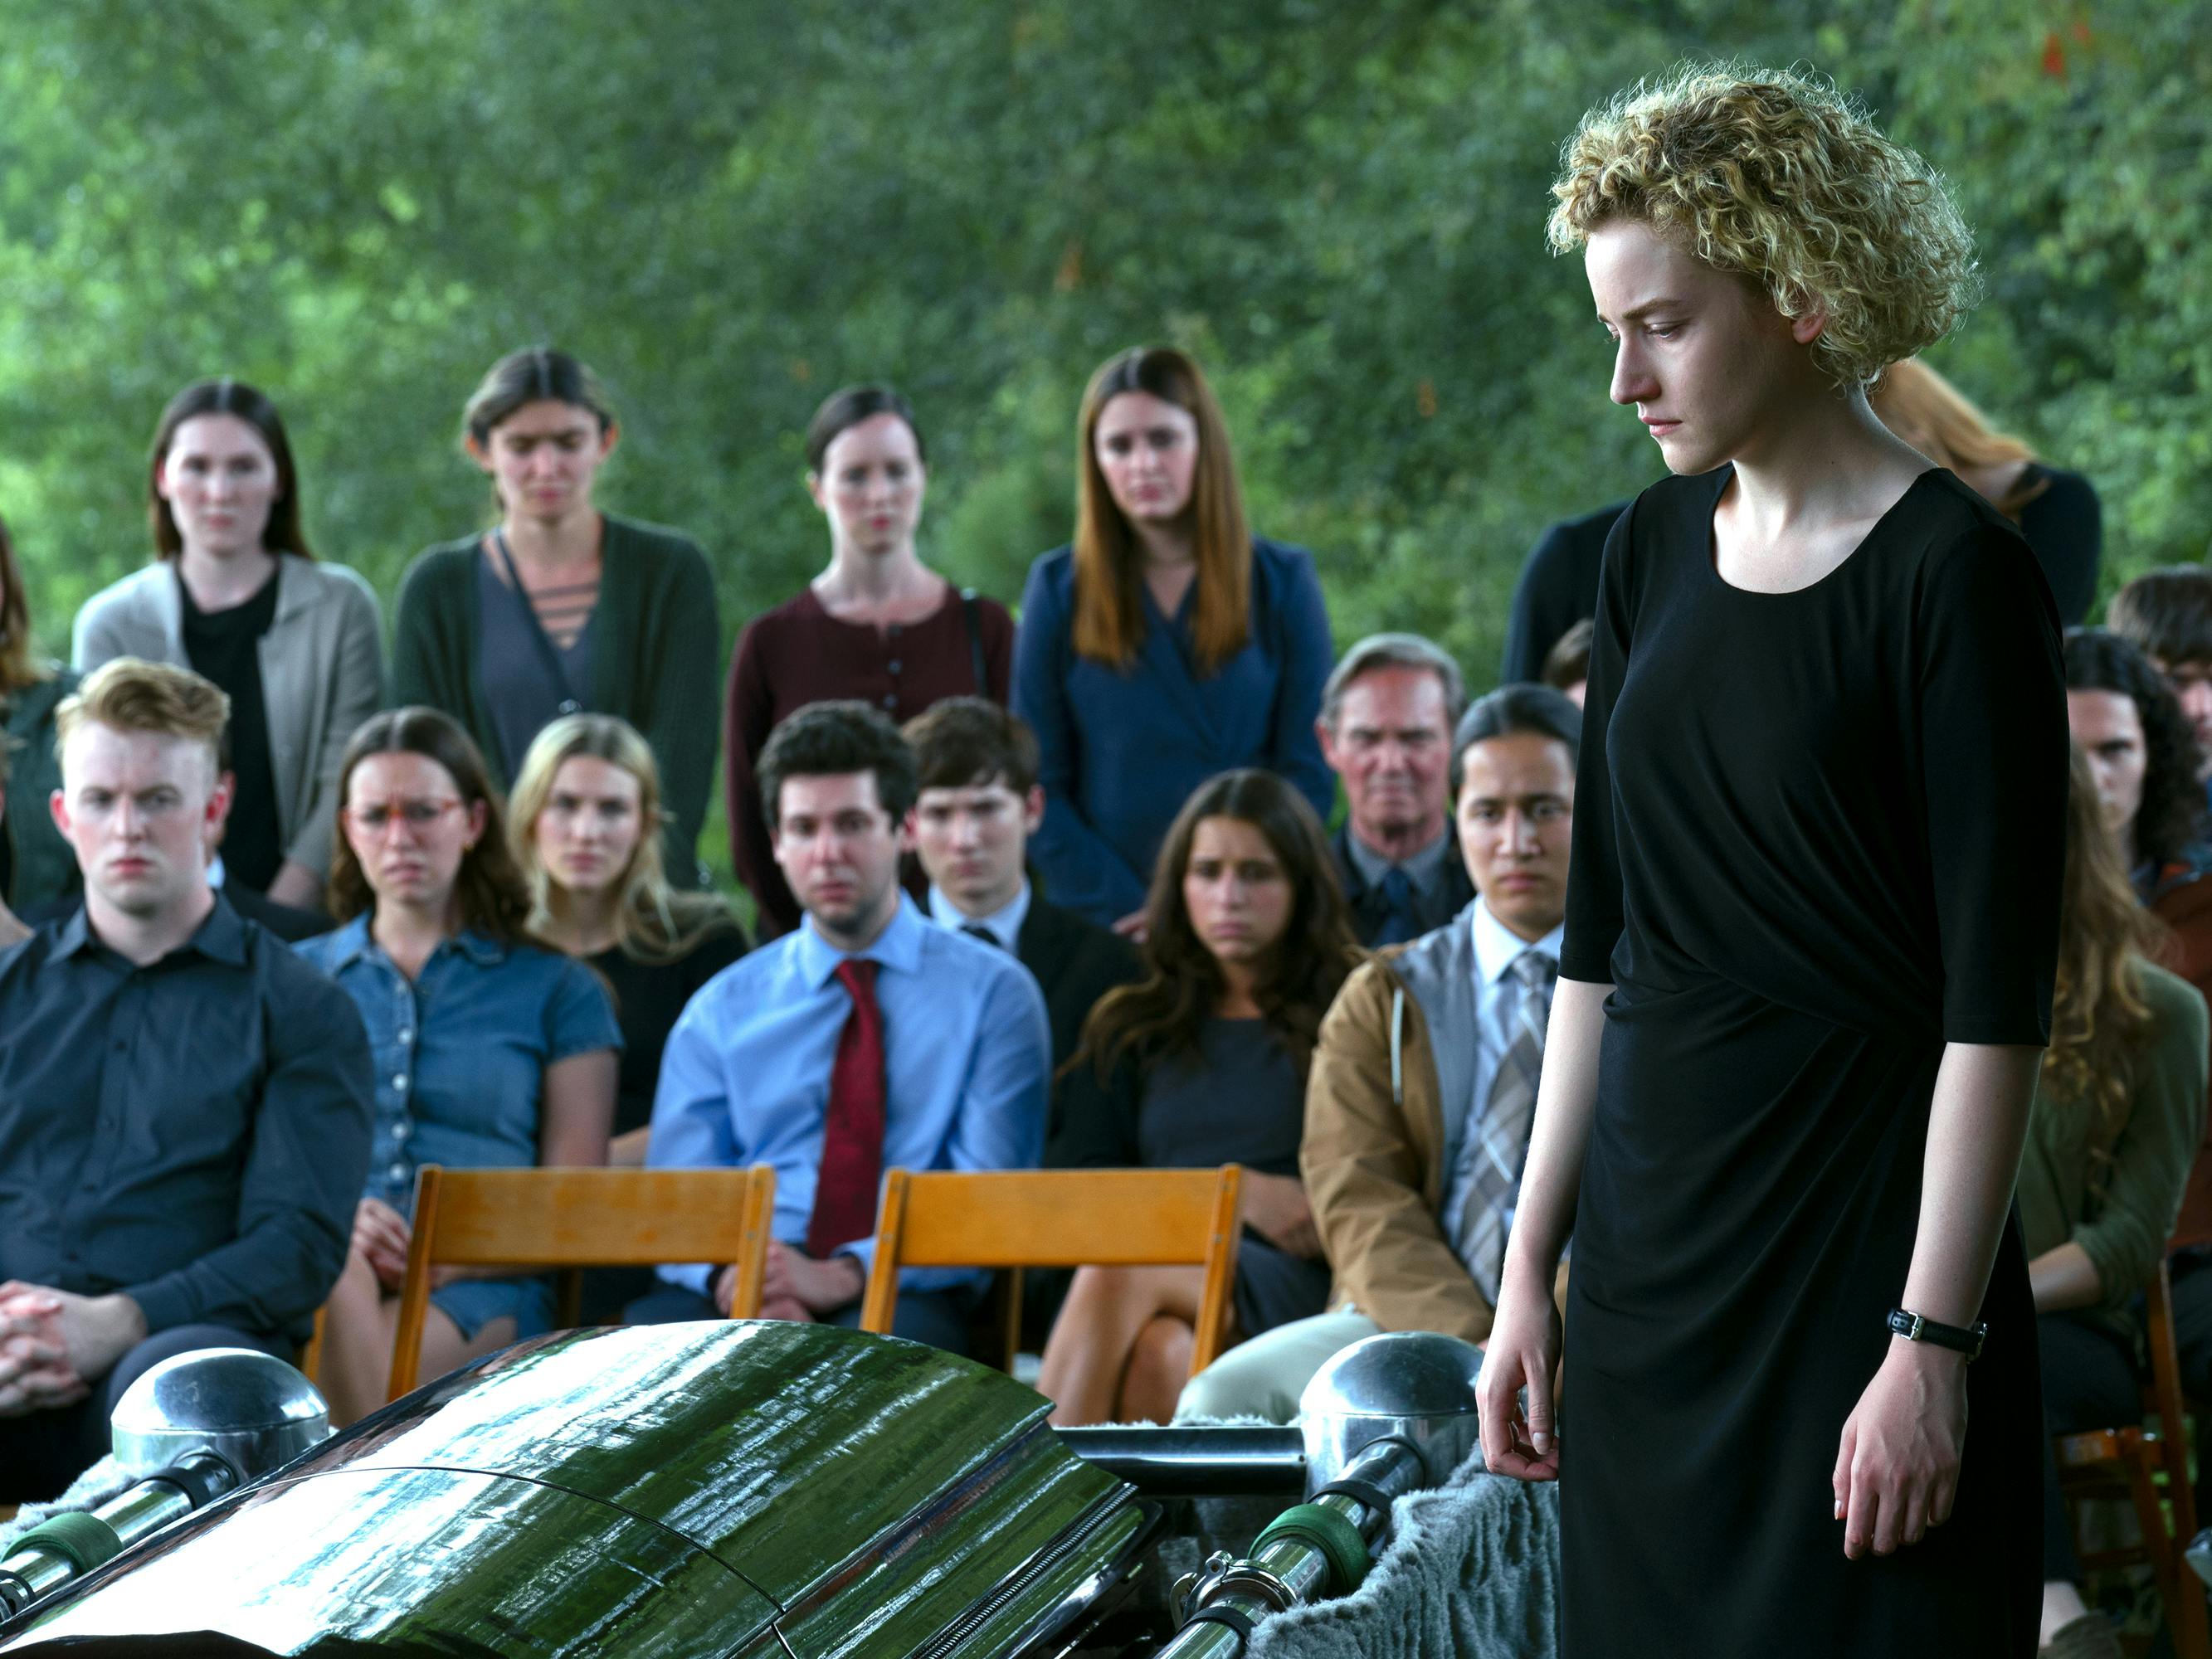 Ruth Langmore (Julia Garner) wears a black outfit and stands in front of a crowd of people. She looks down at a green coffin with a heartbroken look on her face. 